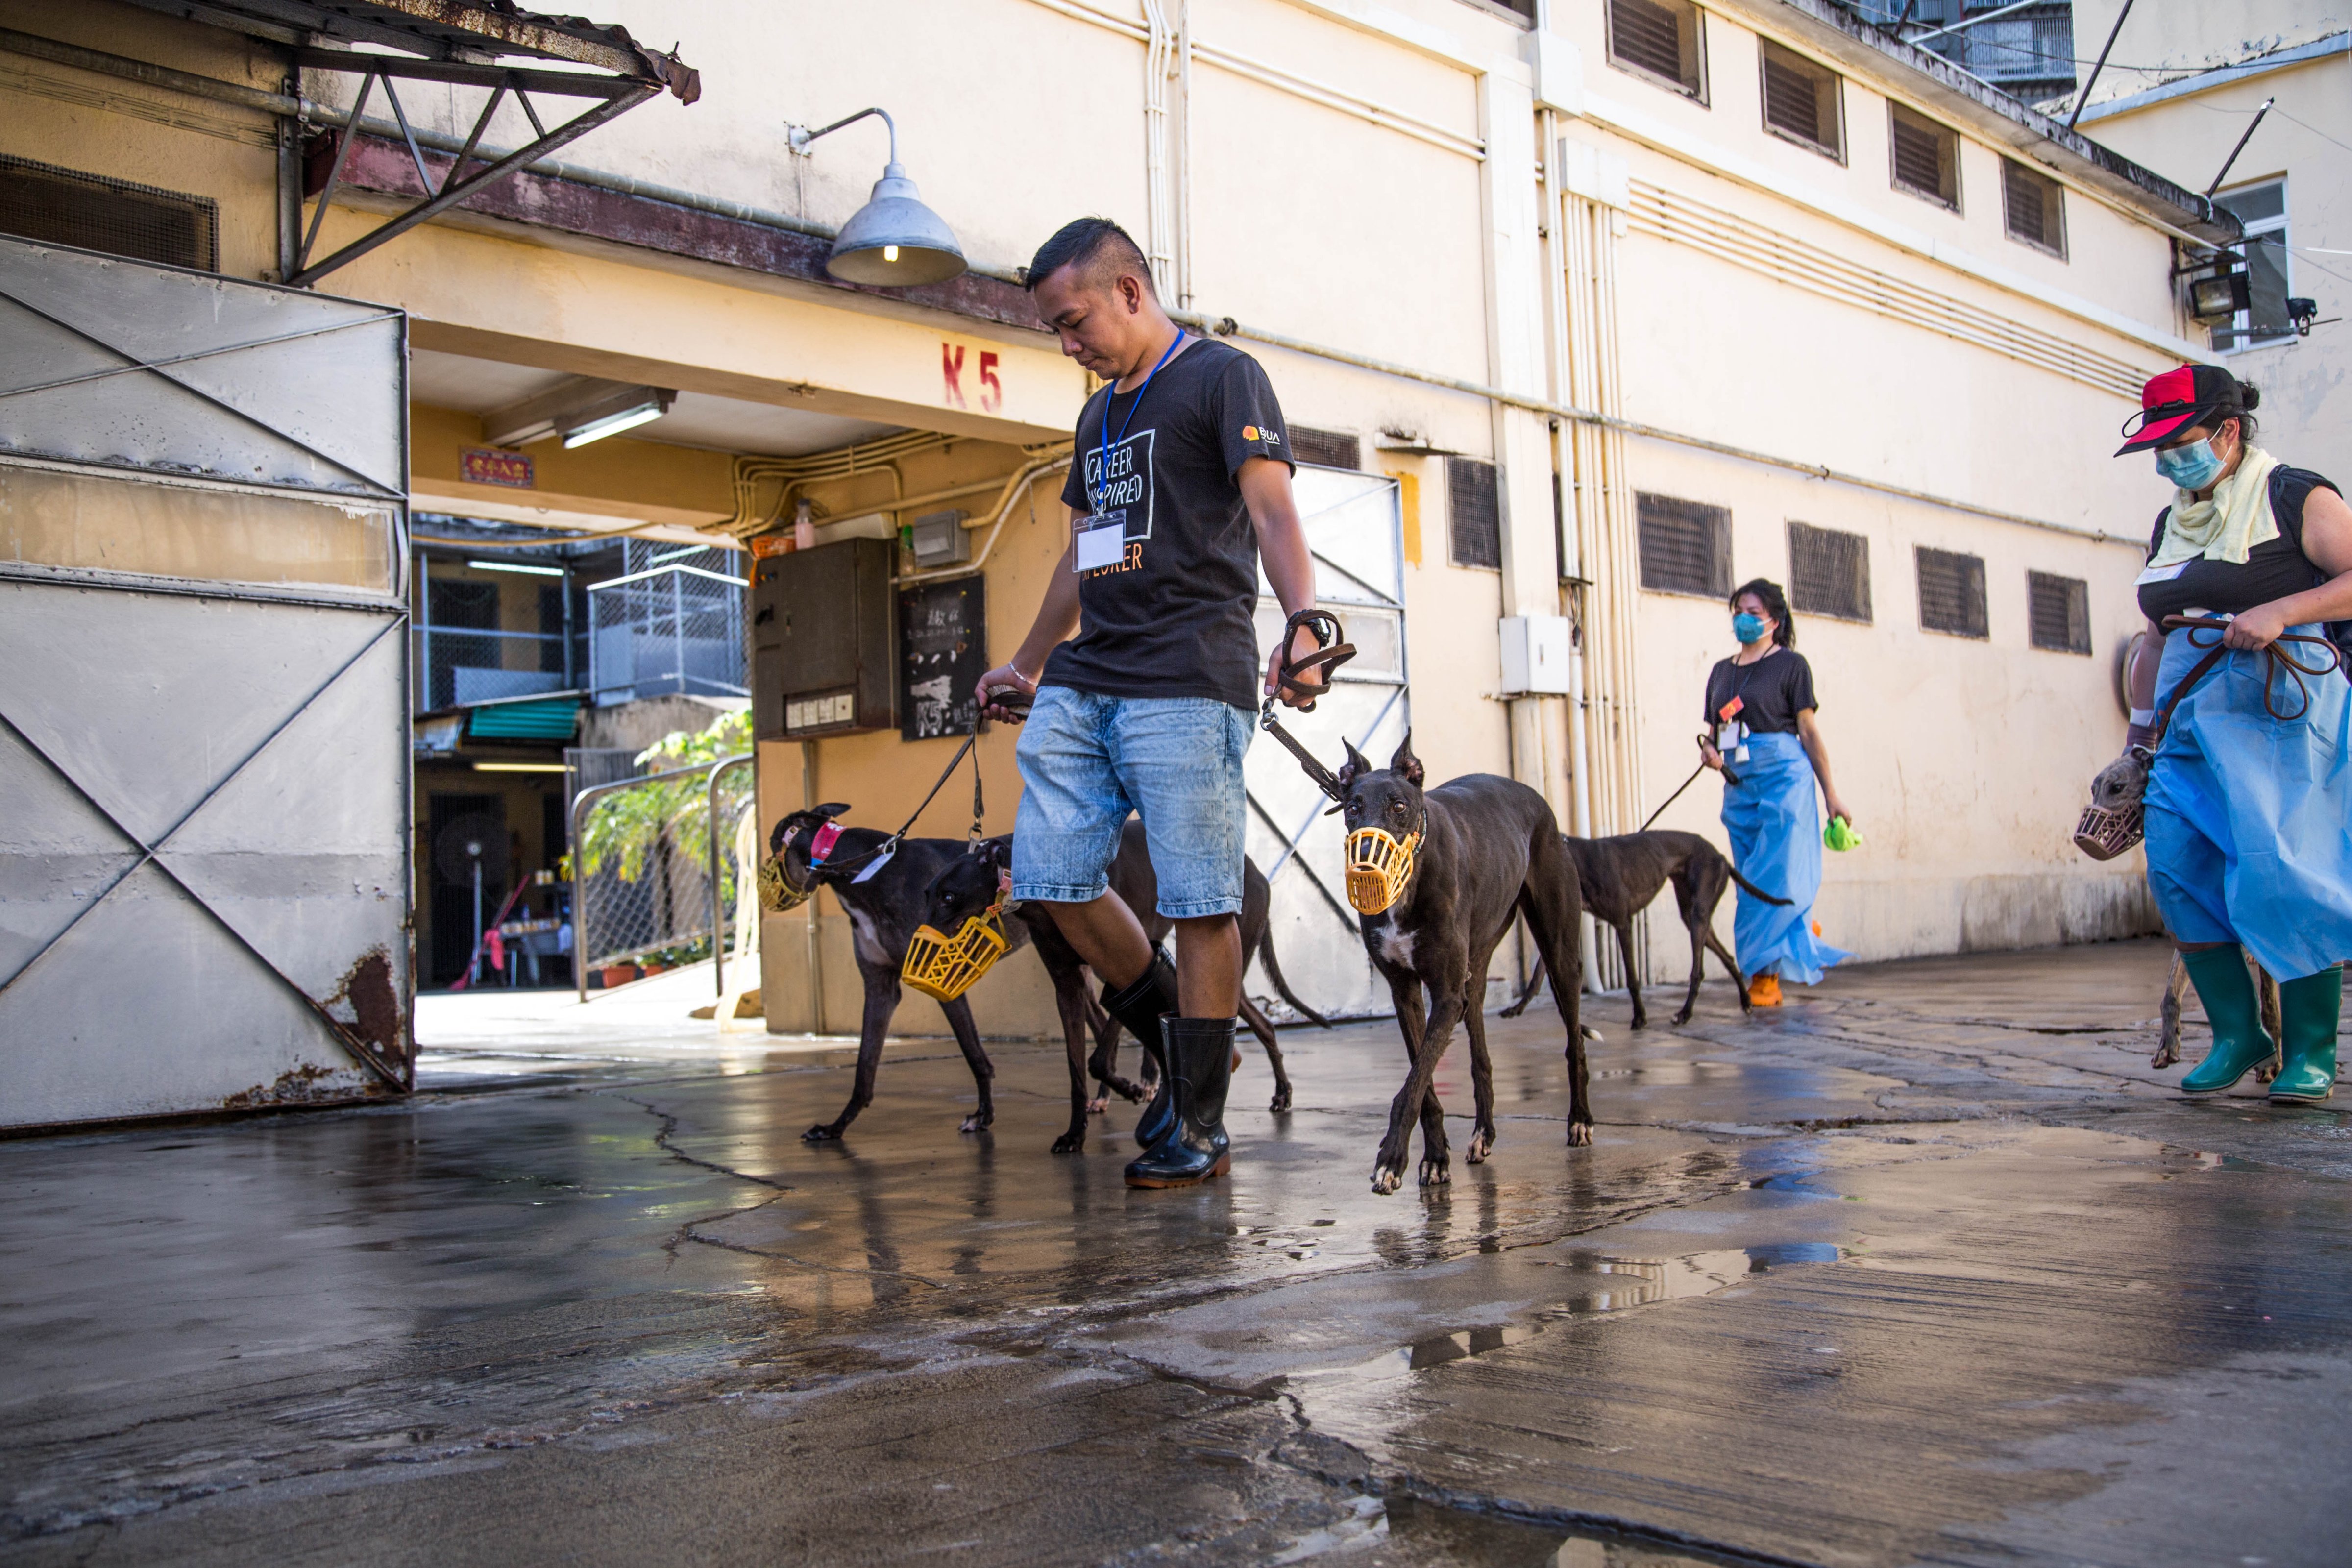 A volunteer walking greyhounds at the kennels at Canidrome in Macau on July 26, 2018. Photo by Aria Chen in Macau for TIME. (Aria Hangyu Chen&mdash;TIME)